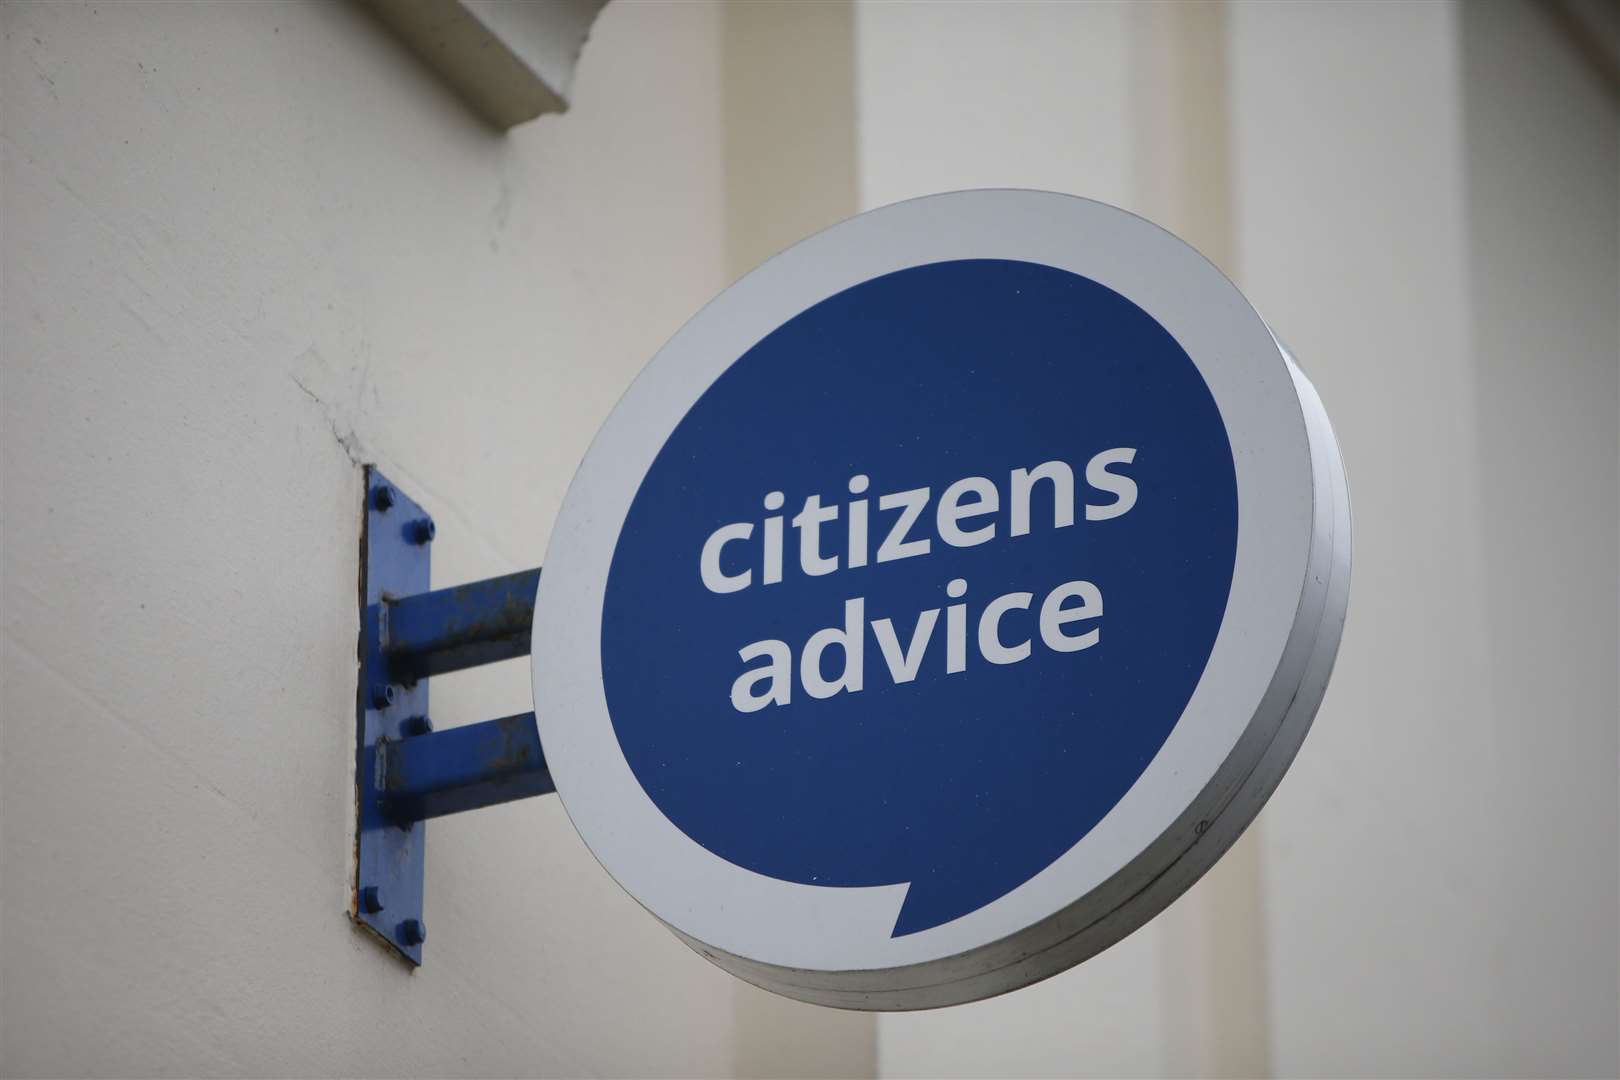 Two Citizen’s Advice Bureaux will be the main beneficiaries of the awards